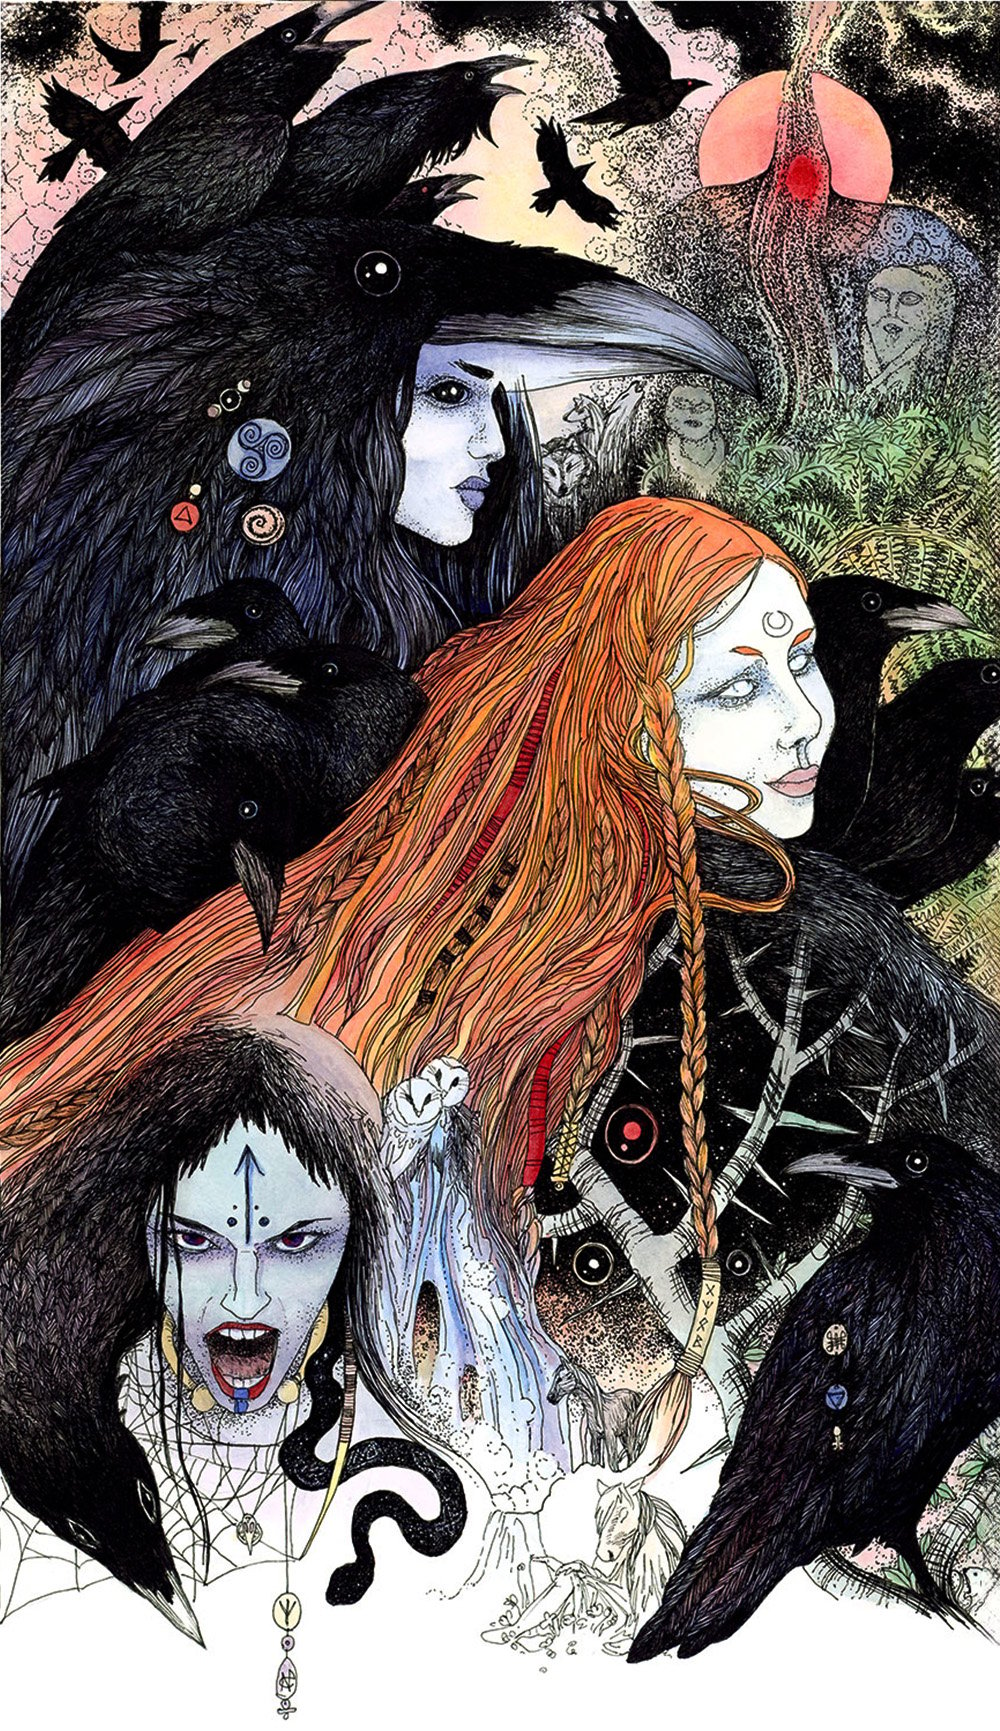 An illustration of three sisters that compose The Morrigan goddess. One is in the shape of a raven, one has long red hair and blank eyes, and one has cobwebs around her neck and a snake crawling down her shoulder.